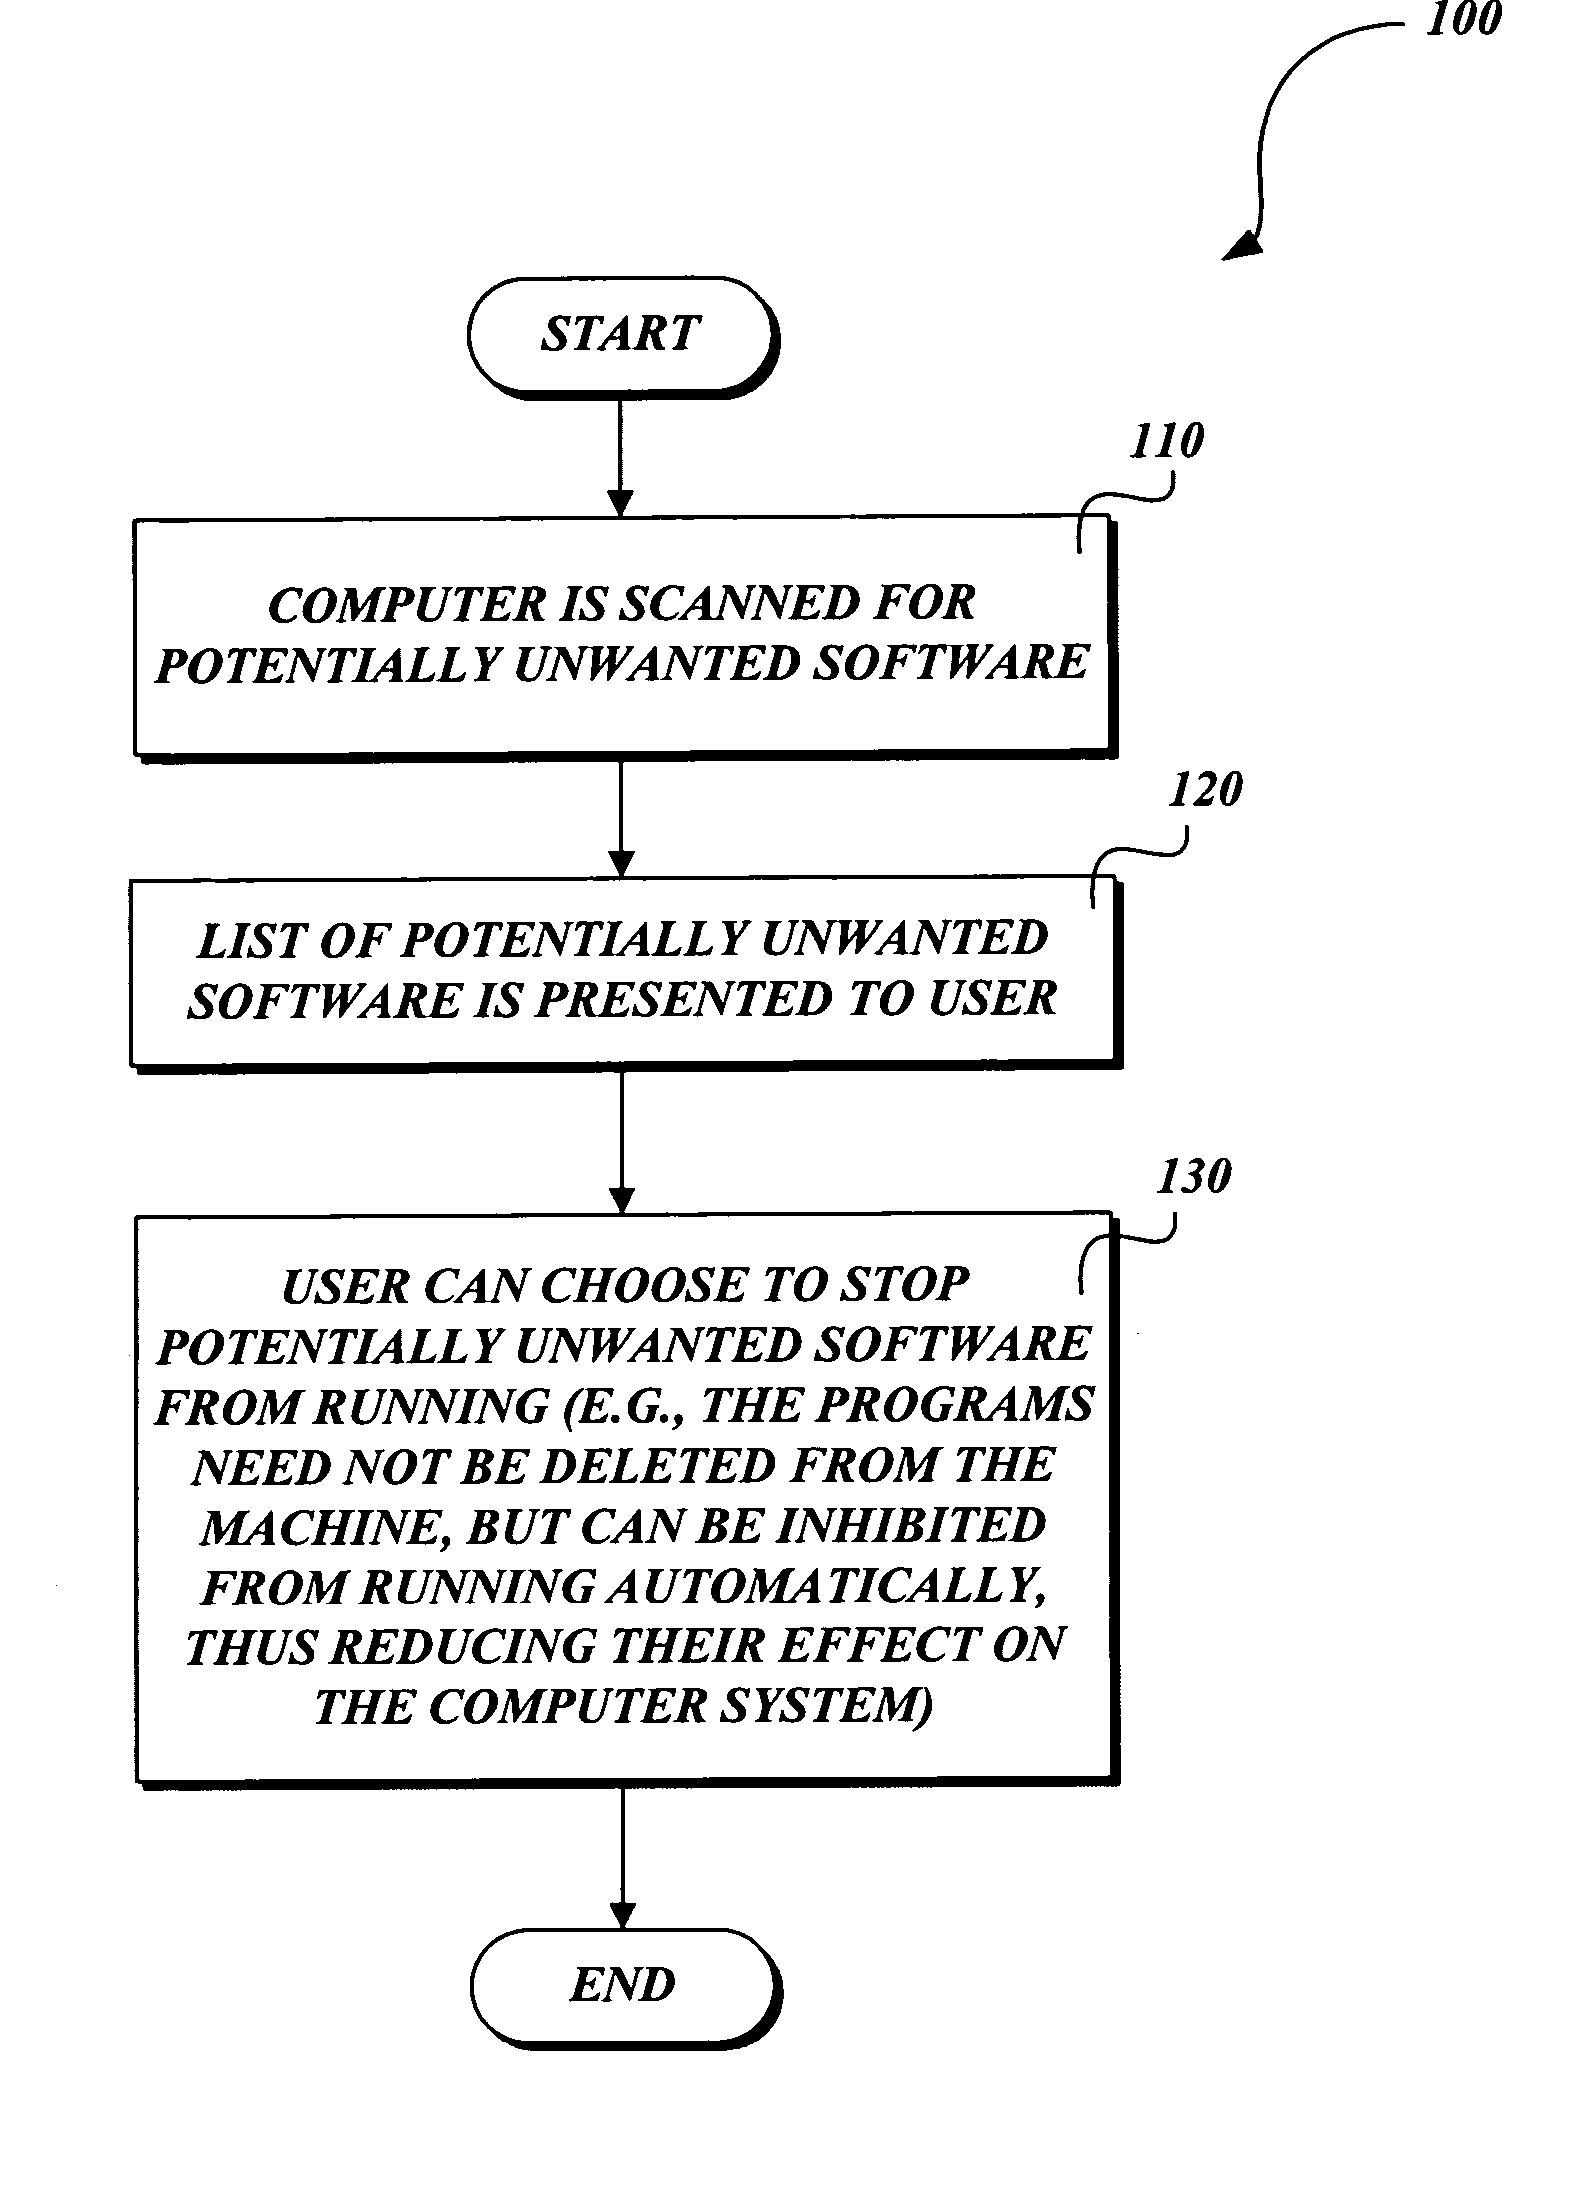 System and method for identifying and removing potentially unwanted software